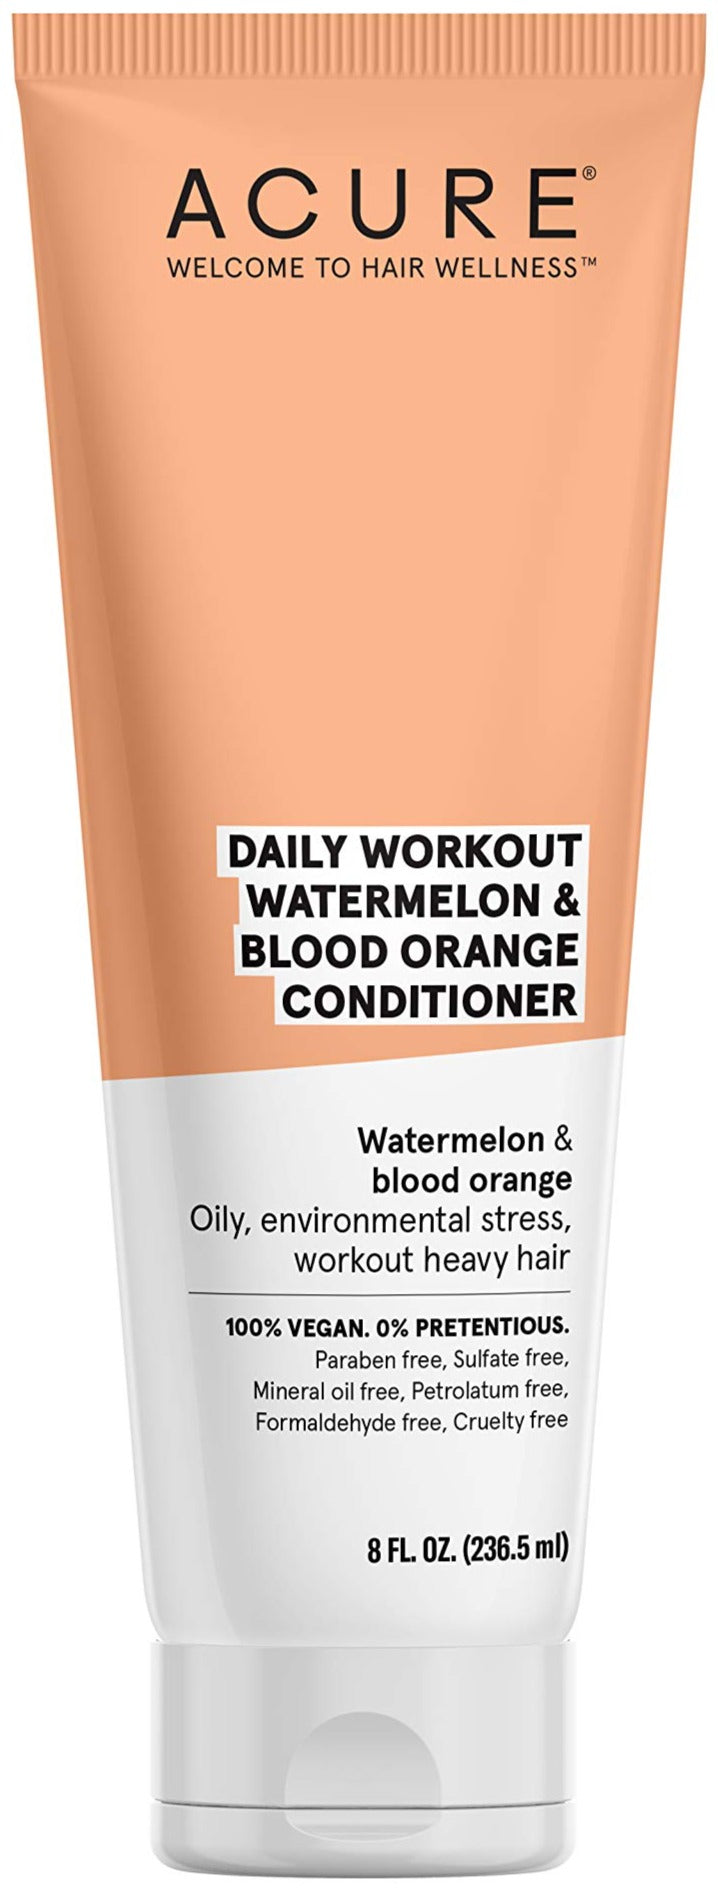 Acure Daily Workout Watermelon and Blood Orange Conditioner, 8 oz